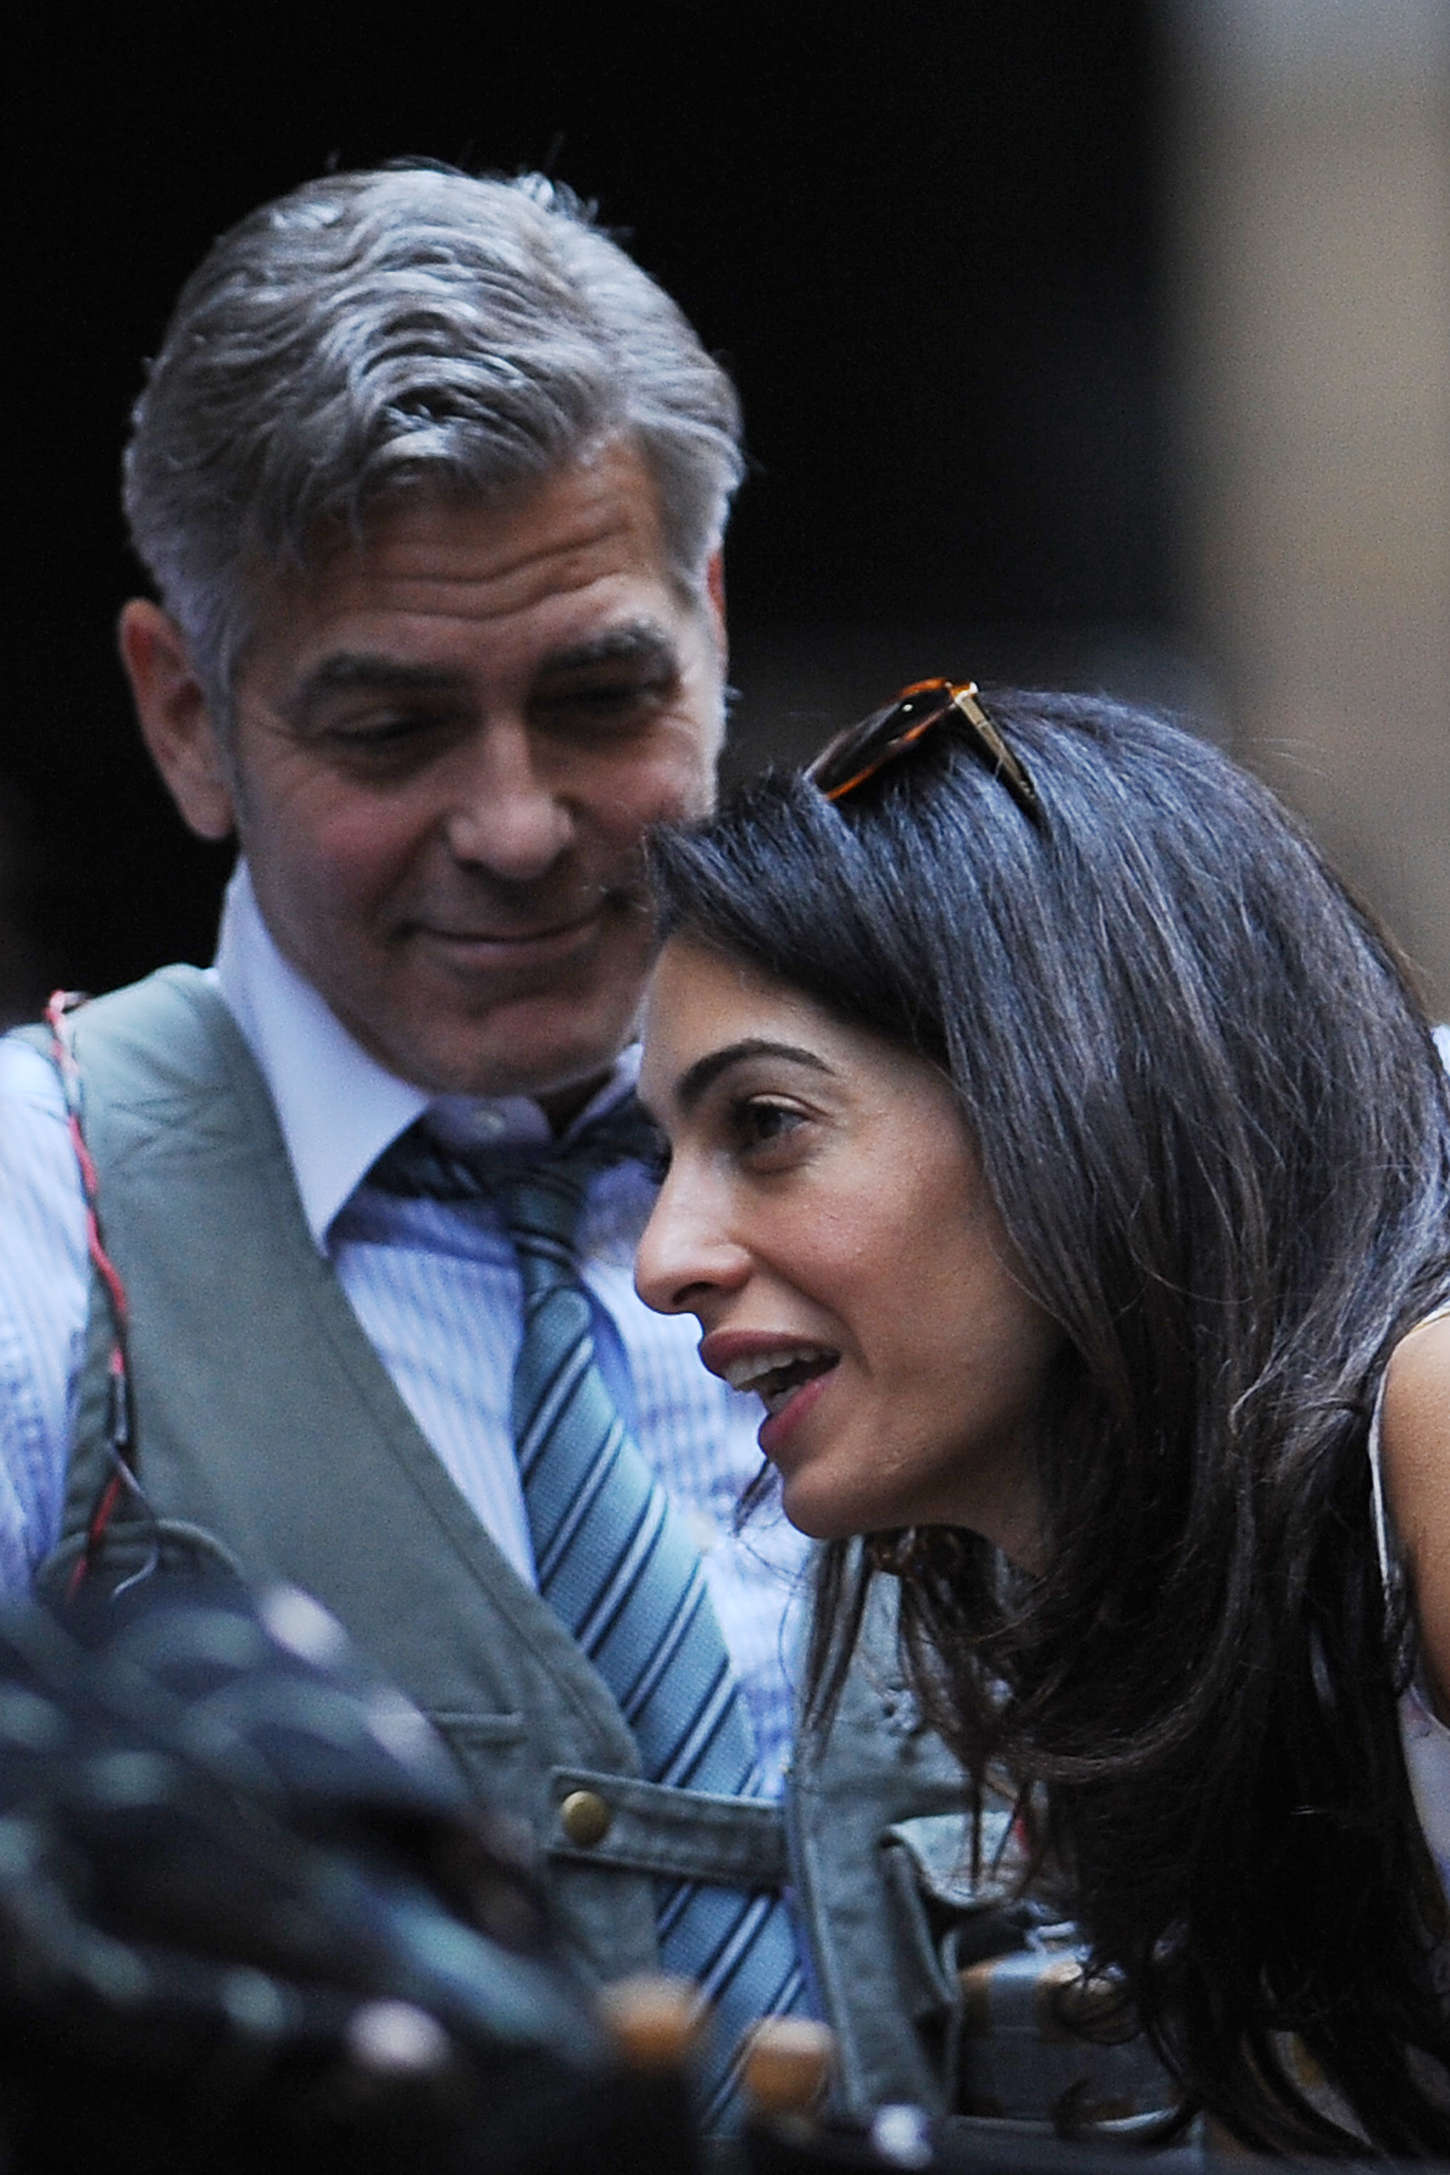 Amal Clooney Visiting the Money Monster set in New York